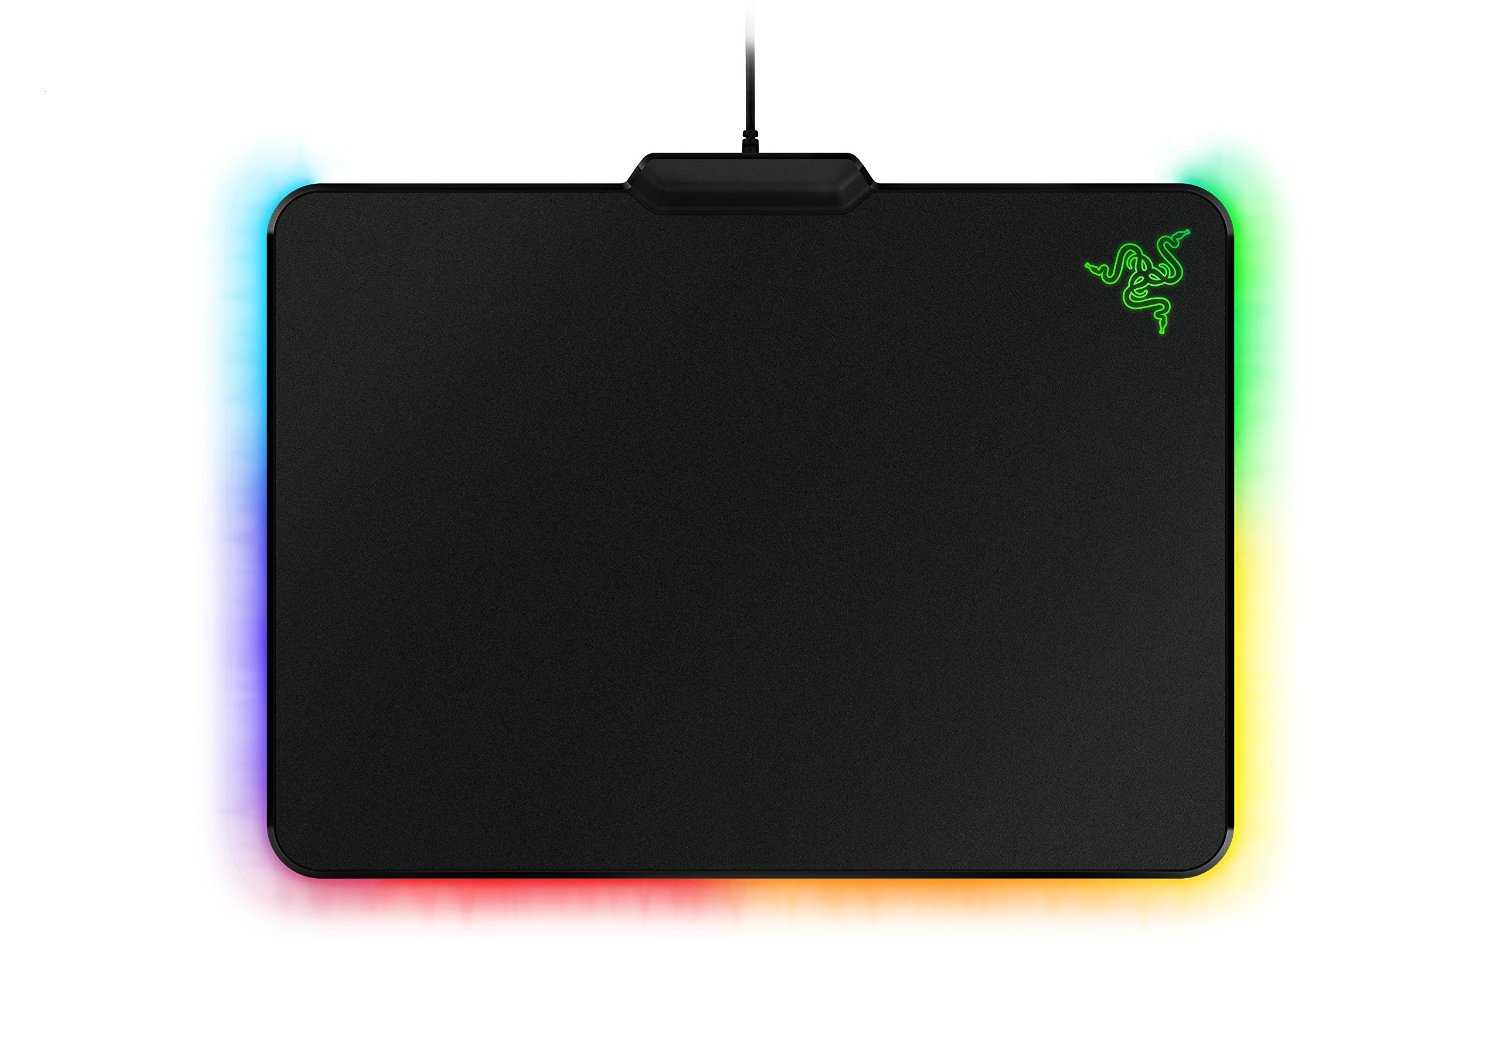 Best Gaming Mouse Pad Review 2020 : Buyer's Guide cover image